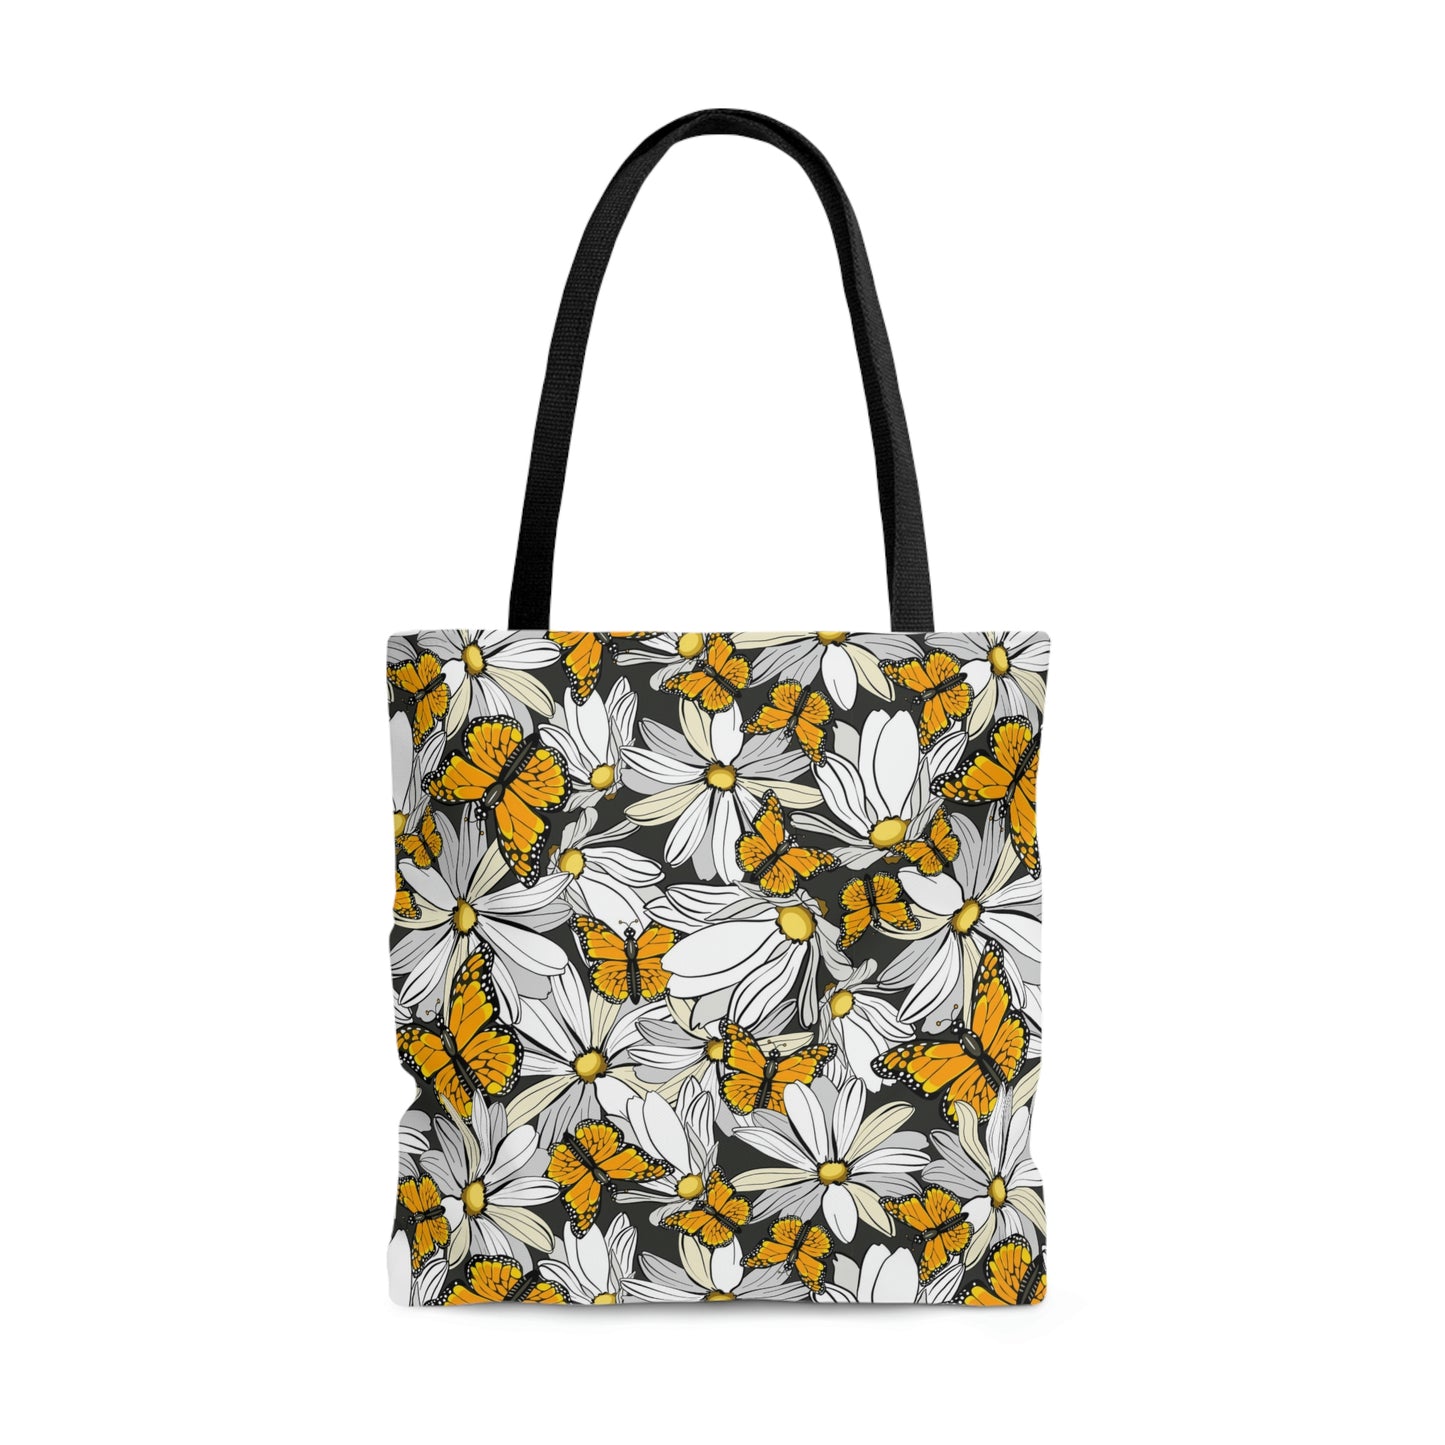 Monarch butterfly Tote Bag. White flowes and butterflies bag. Plant milkweed and save the monarch butterflies.